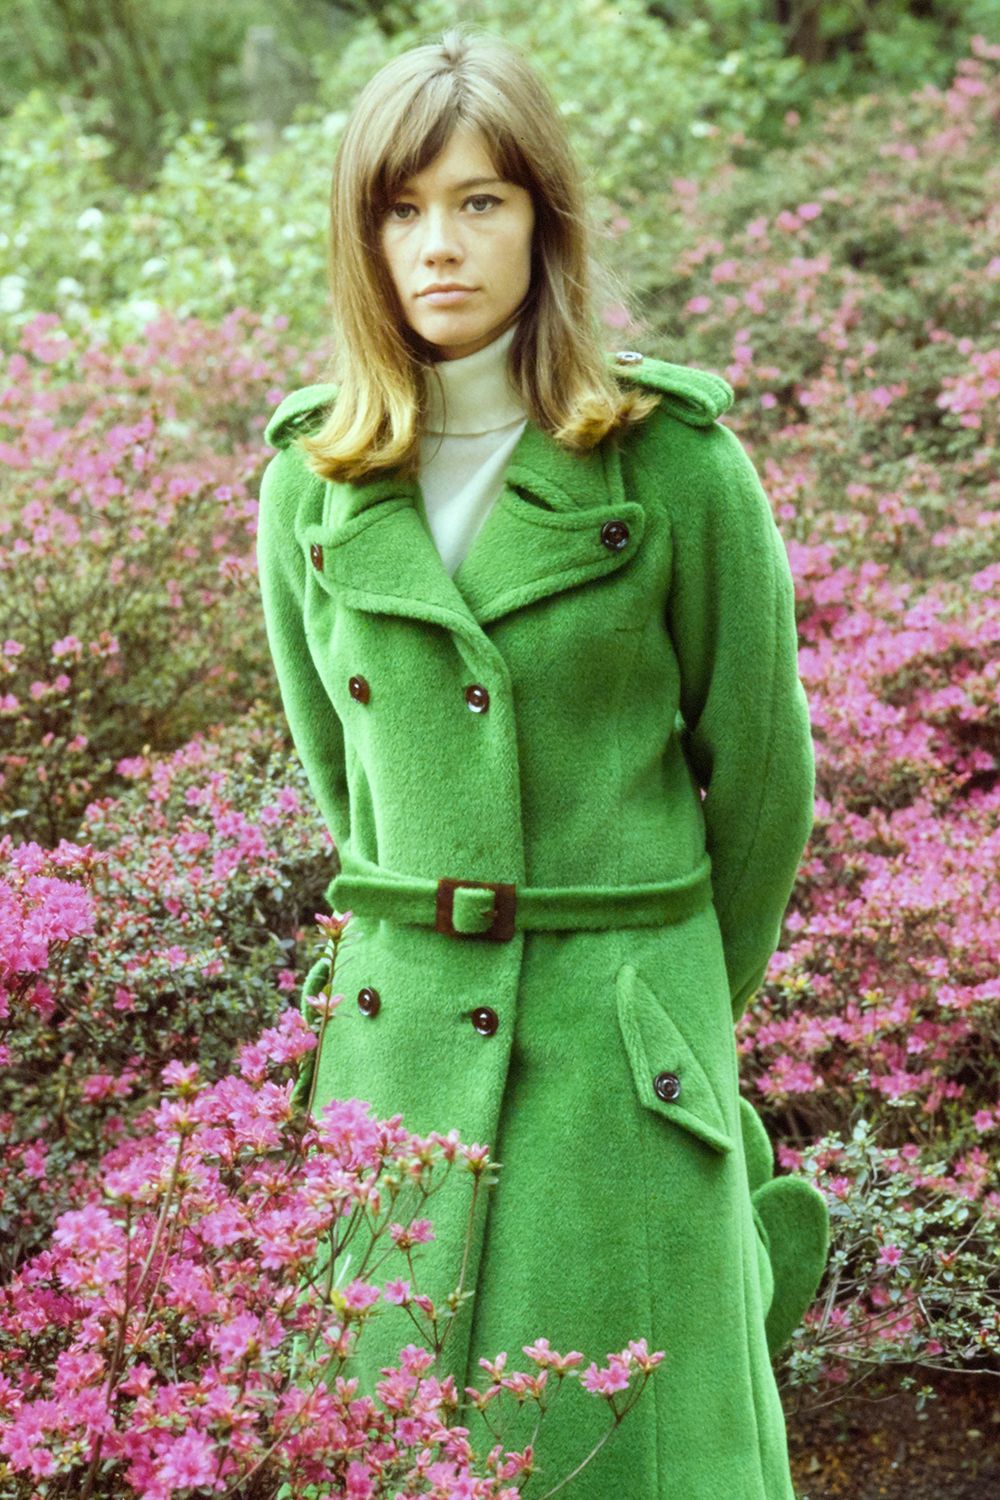 The 6 Françoise Hardy Outfits I'm Copying This Season | Who What Wear